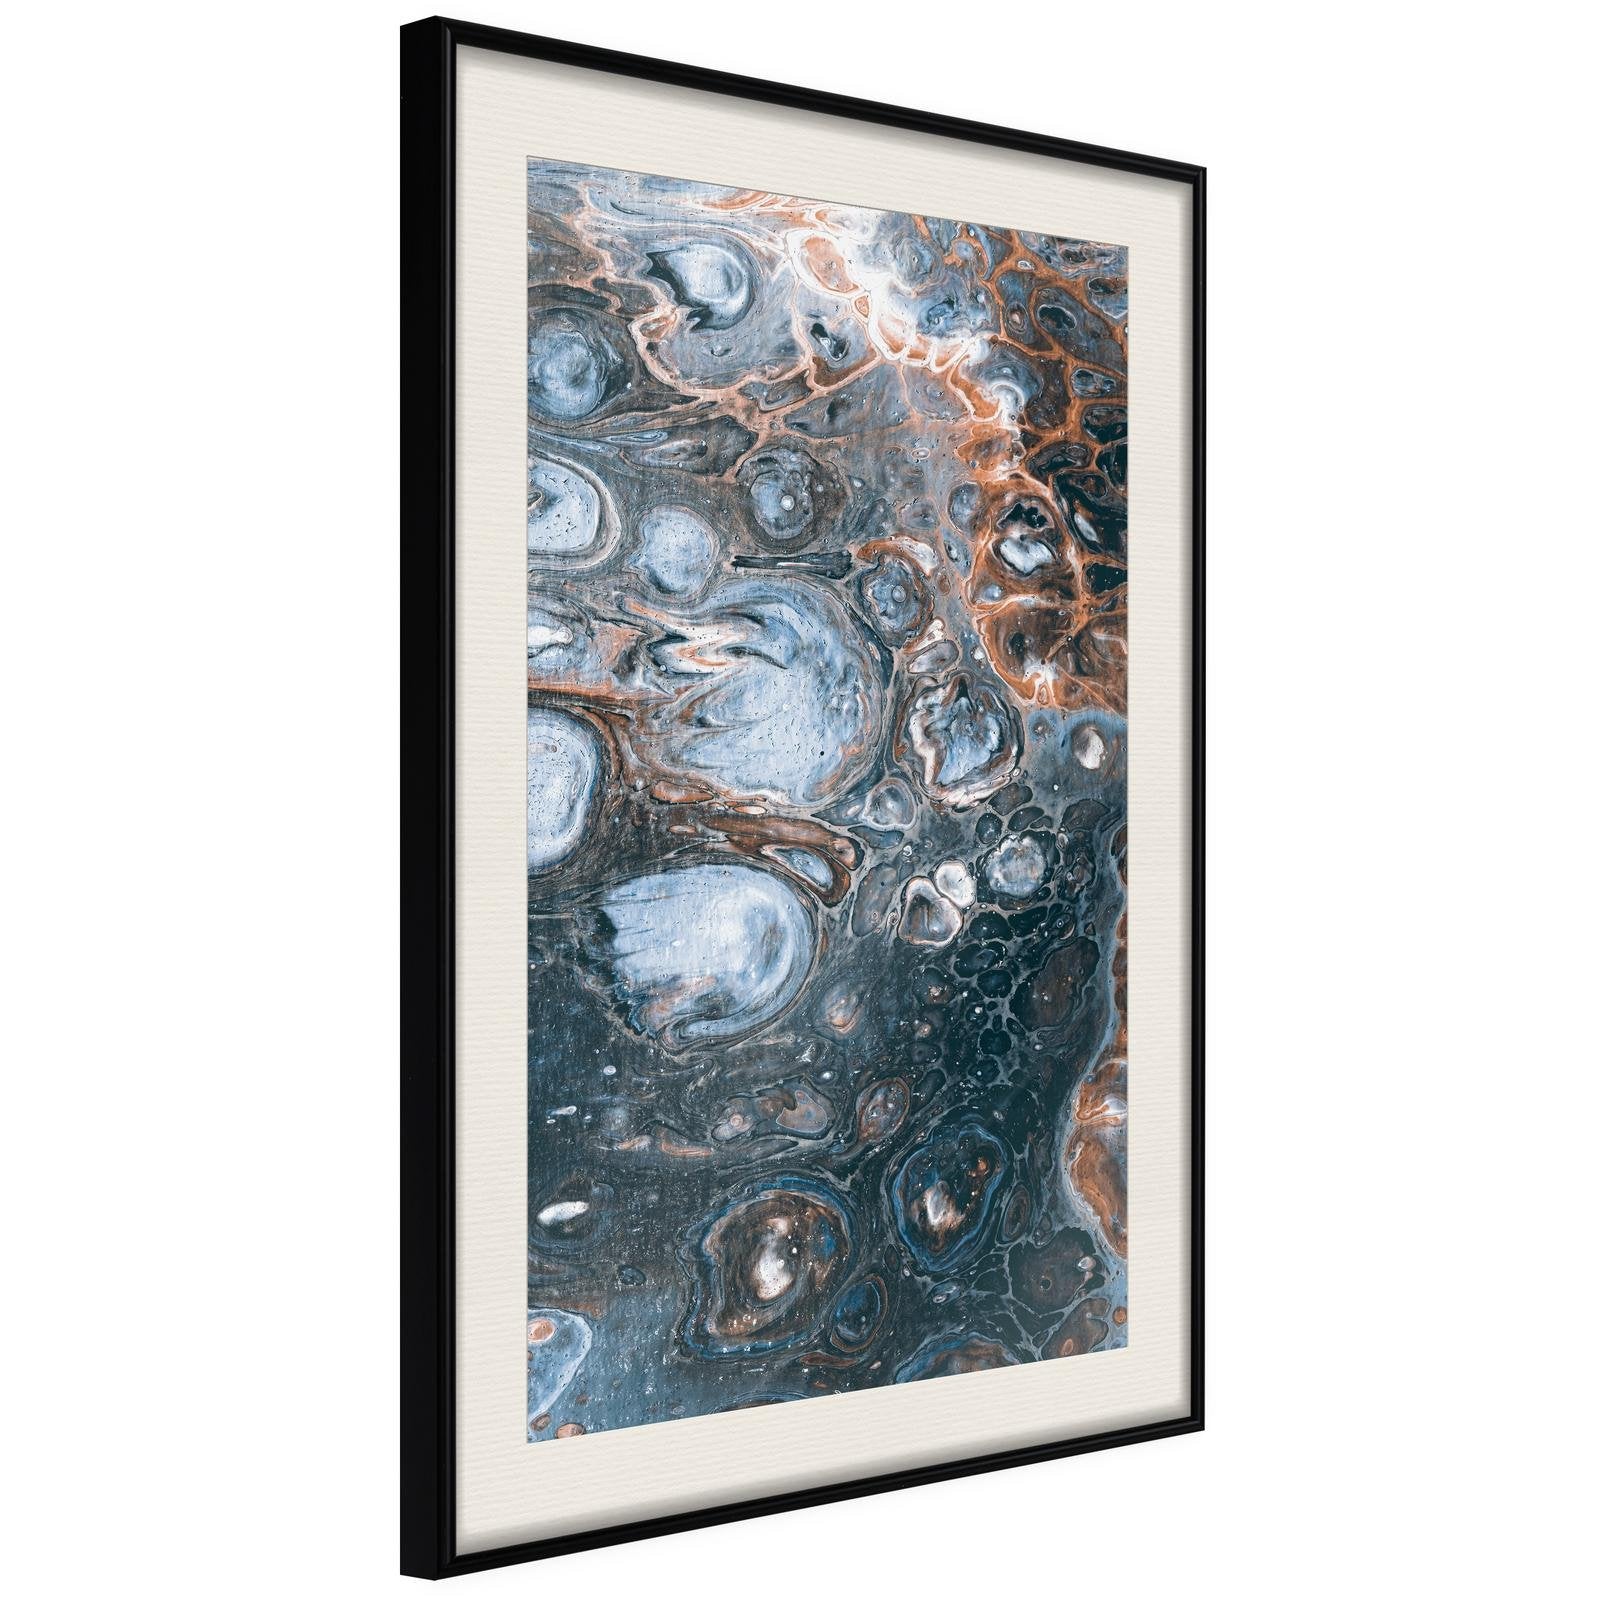 Inramad Poster / Tavla - Surface of the Unknown Planet I - 30x45 Svart ram med passepartout